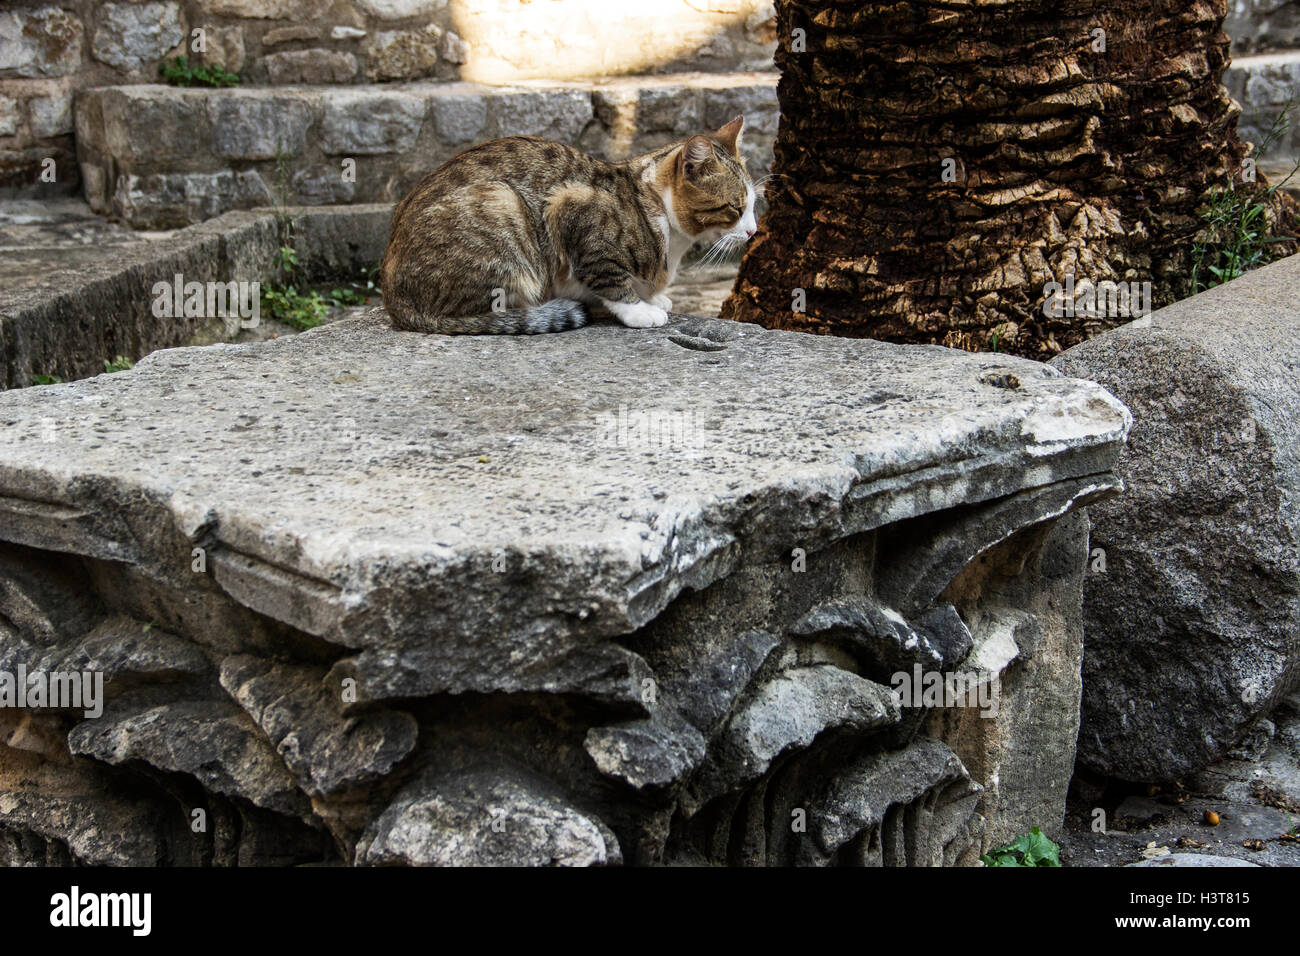 Old Town of Budva, Montenegro - A stray cat napping on ancient stone ruins Stock Photo